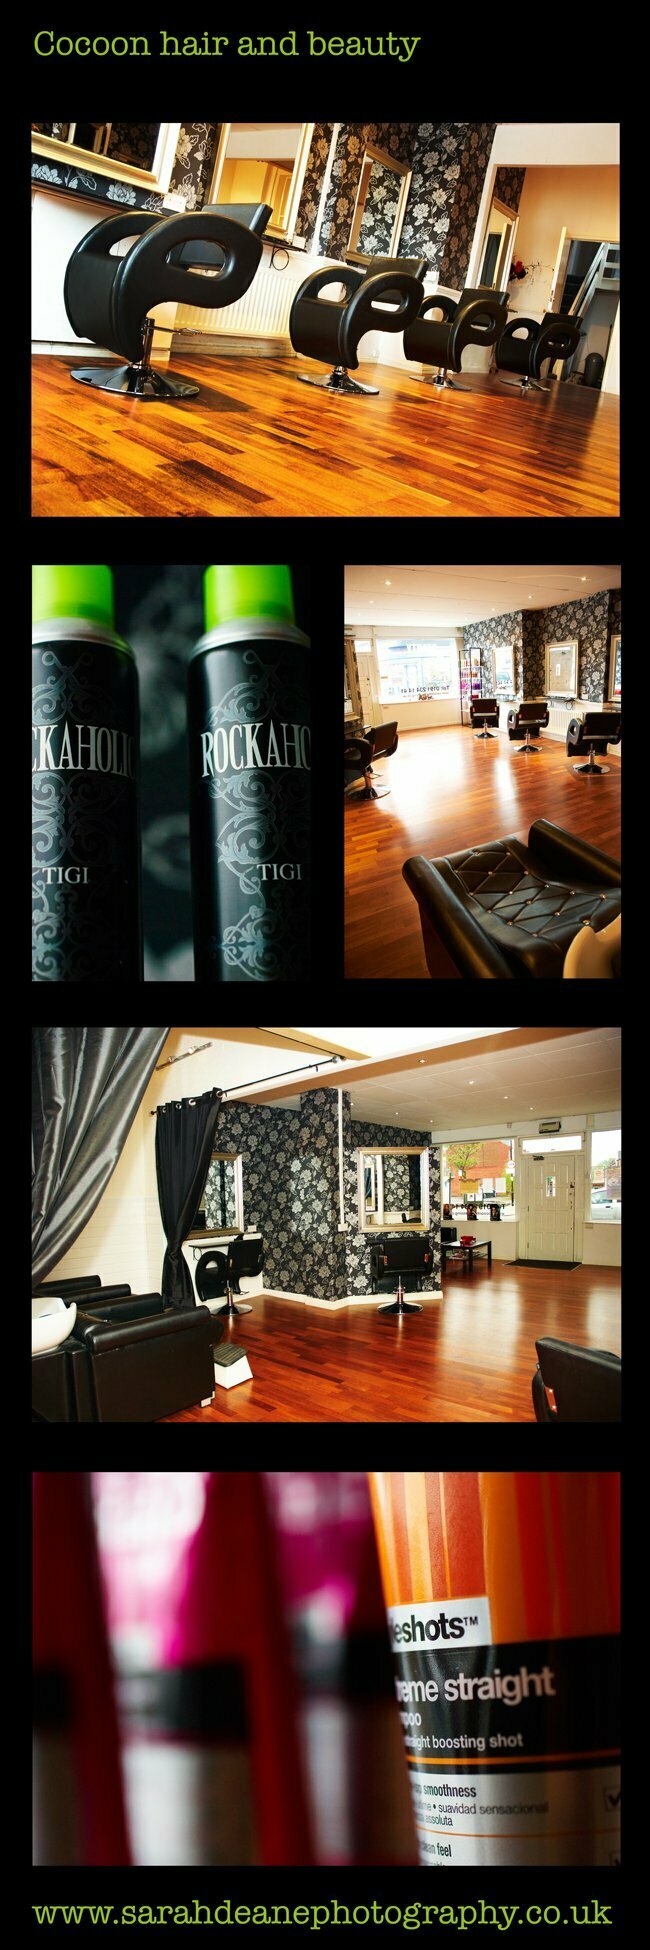 Cocoon Hair and Beauty Salon Interior Photography Newcastle 2